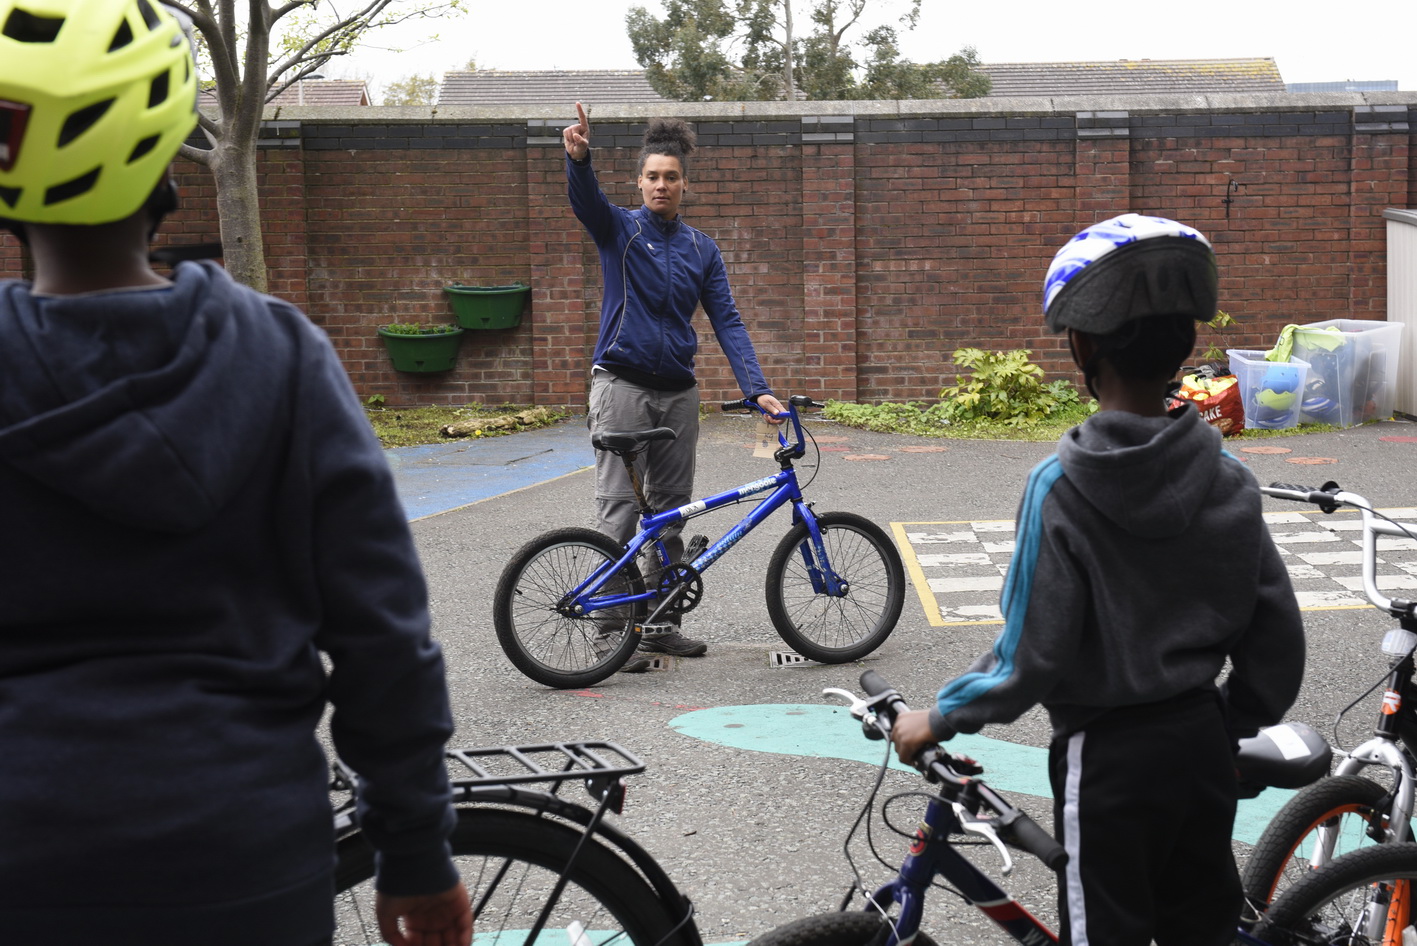 Two children stand by their cycles with their backs to the camera, watching an instructor who is stood by a cycle teaching them.